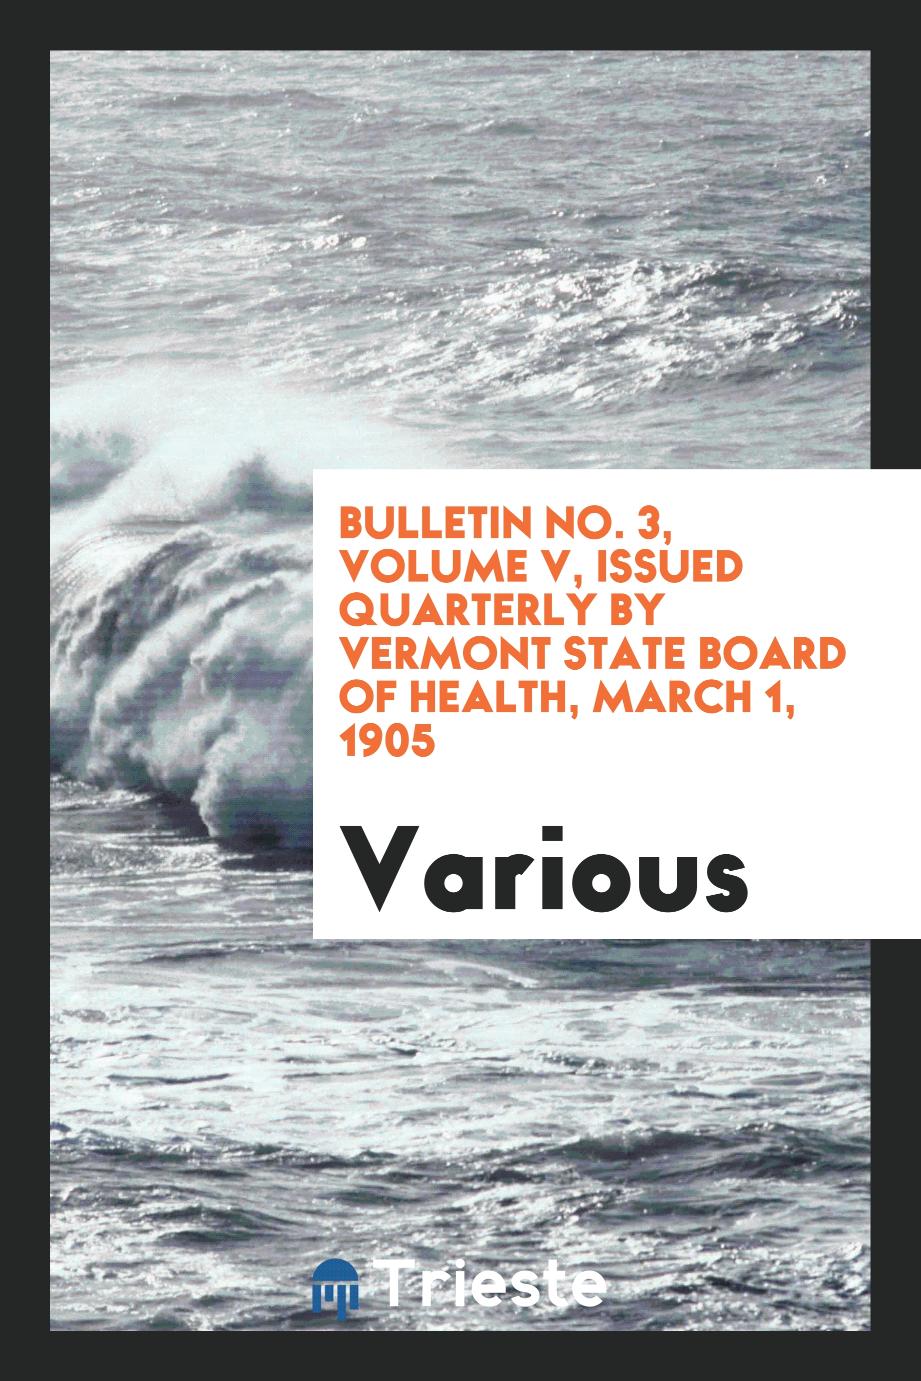 Bulletin No. 3, Volume V, issued quarterly by Vermont state board of Health, March 1, 1905